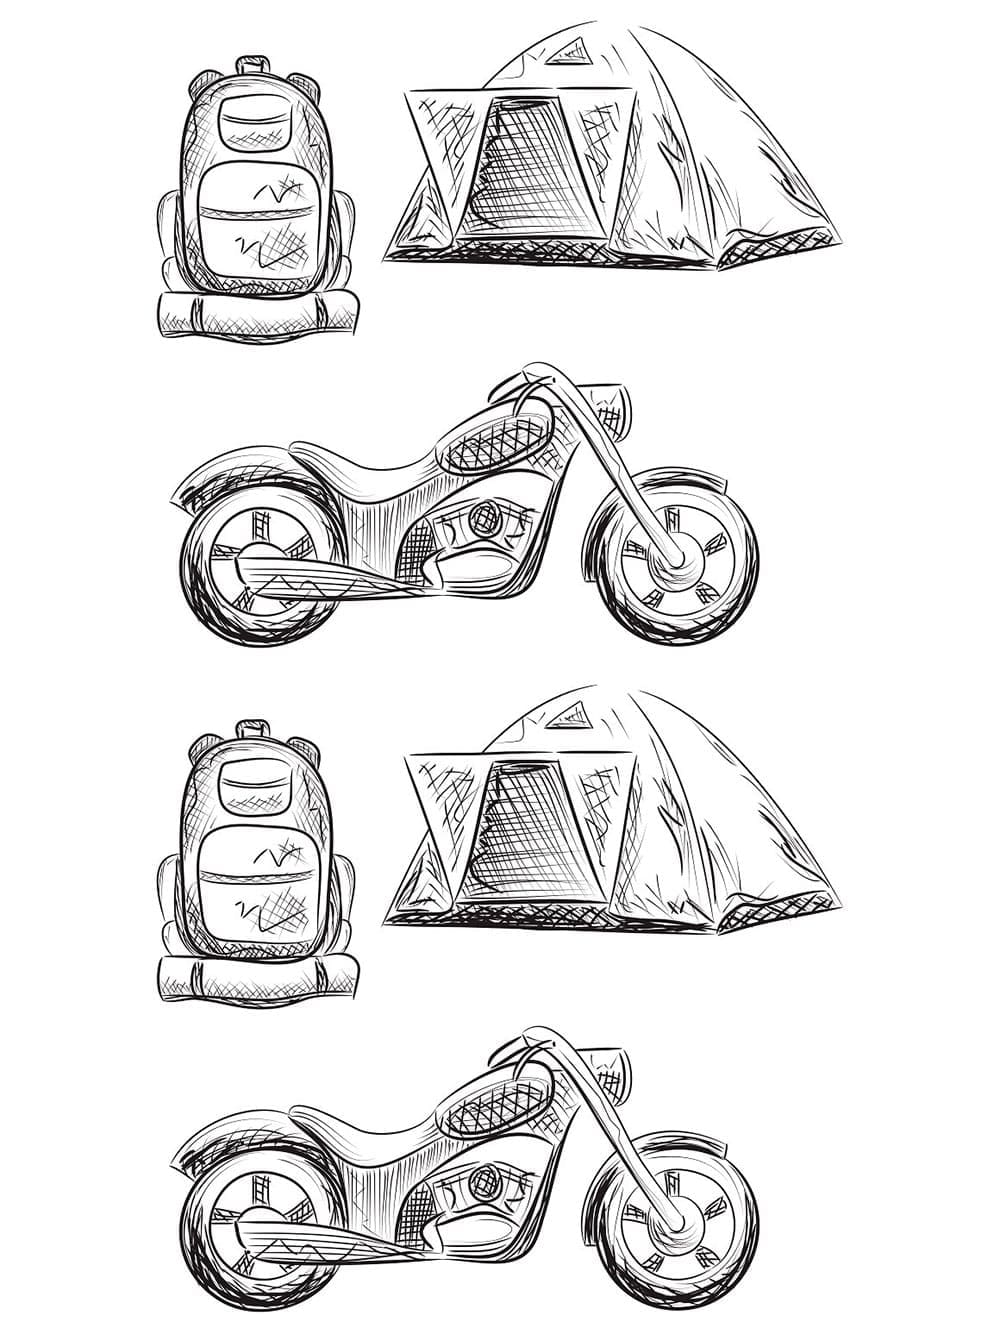 Tourism. backpack tent motorbike, picture for pinterest.